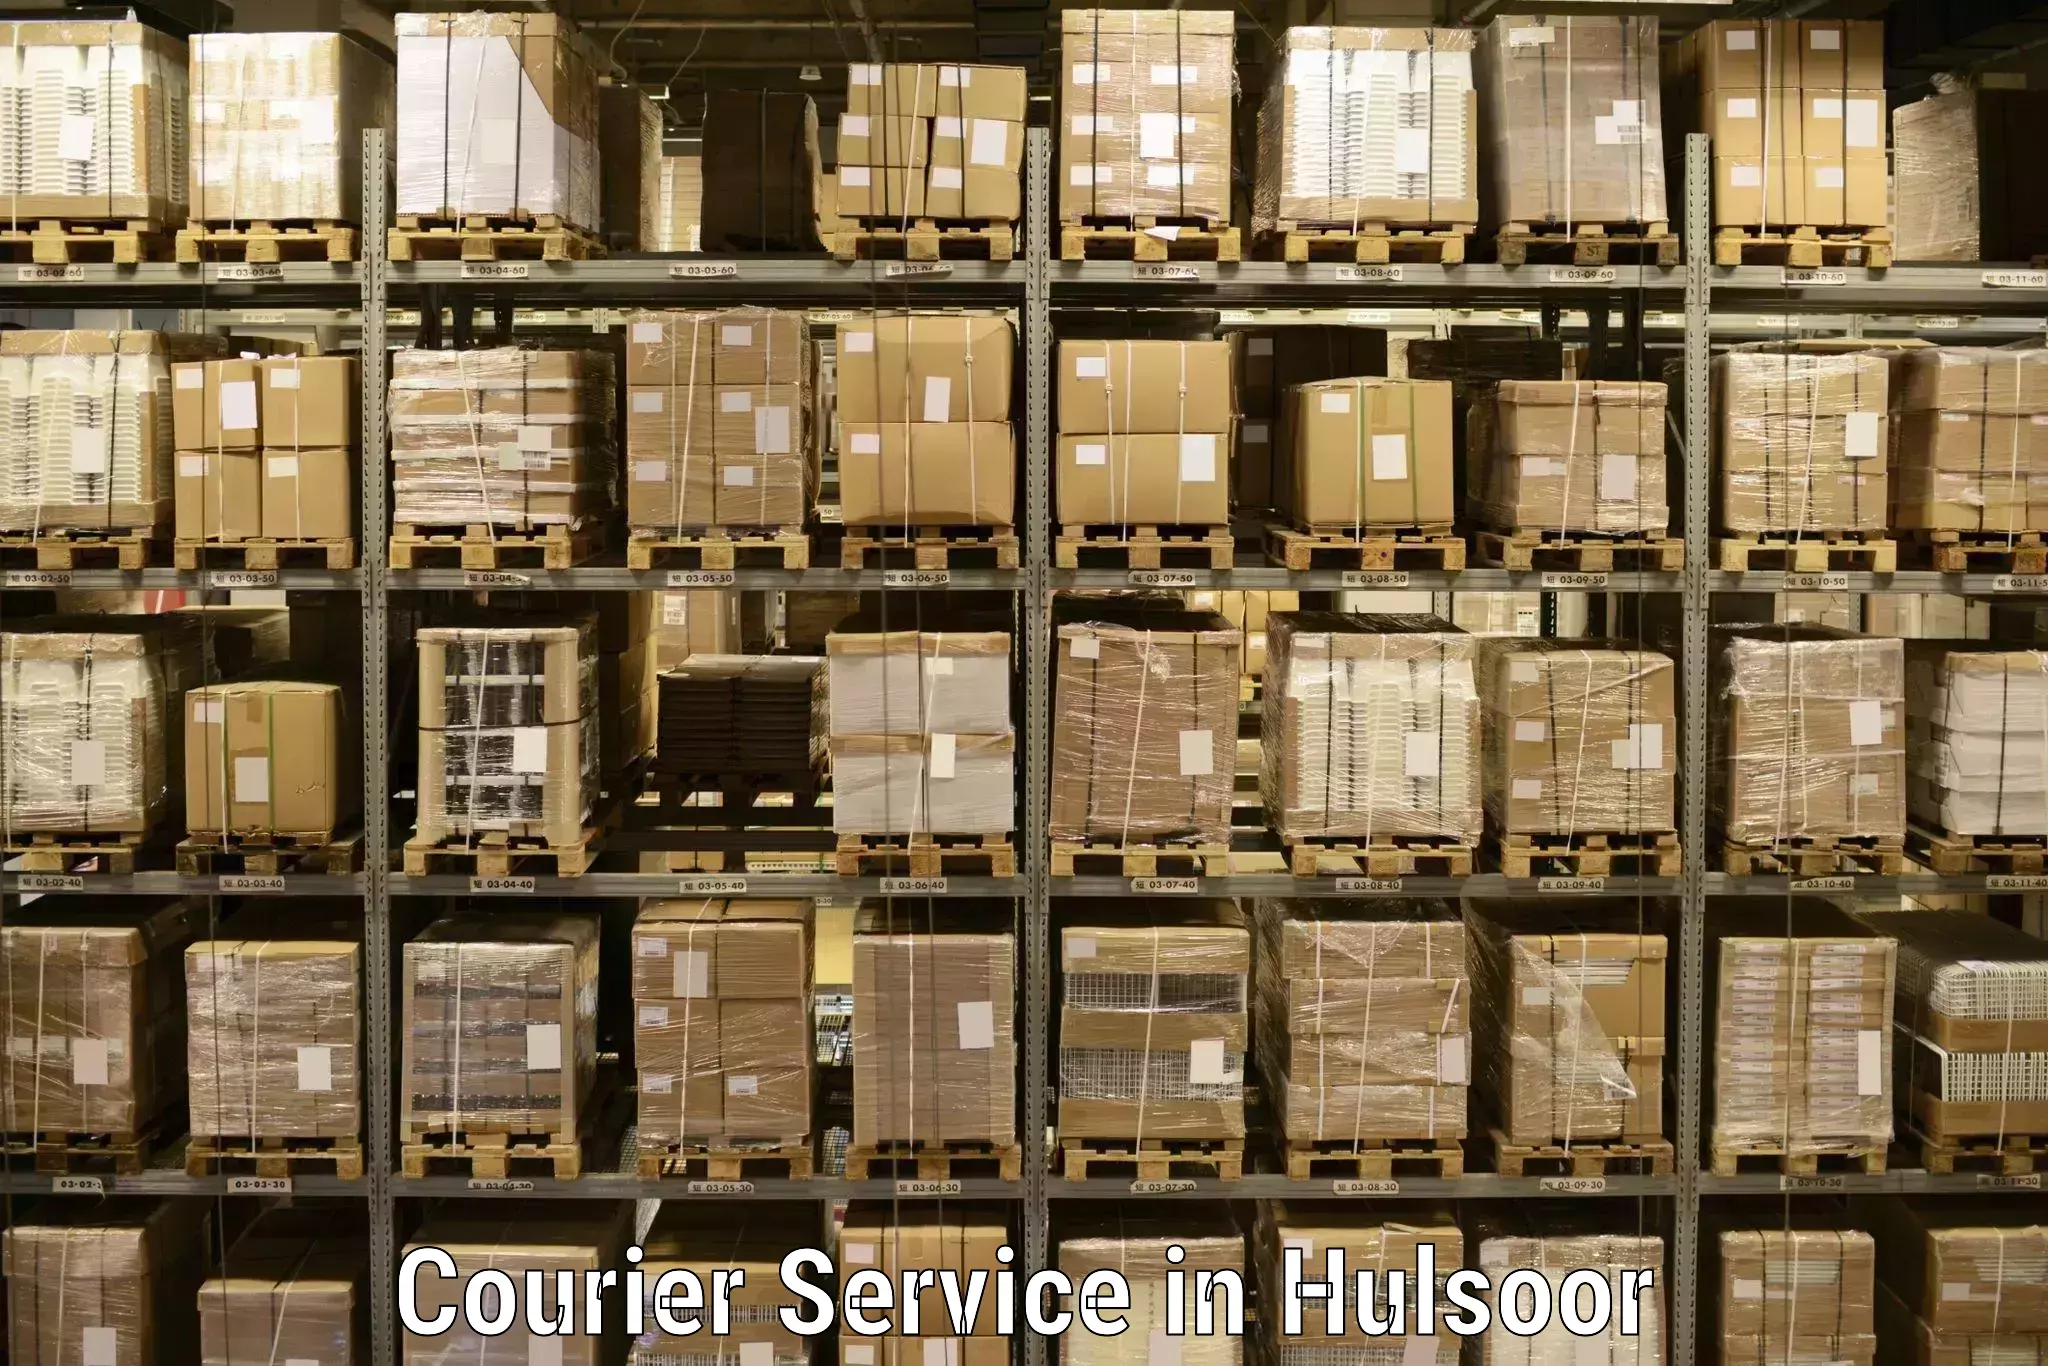 Express postal services in Hulsoor